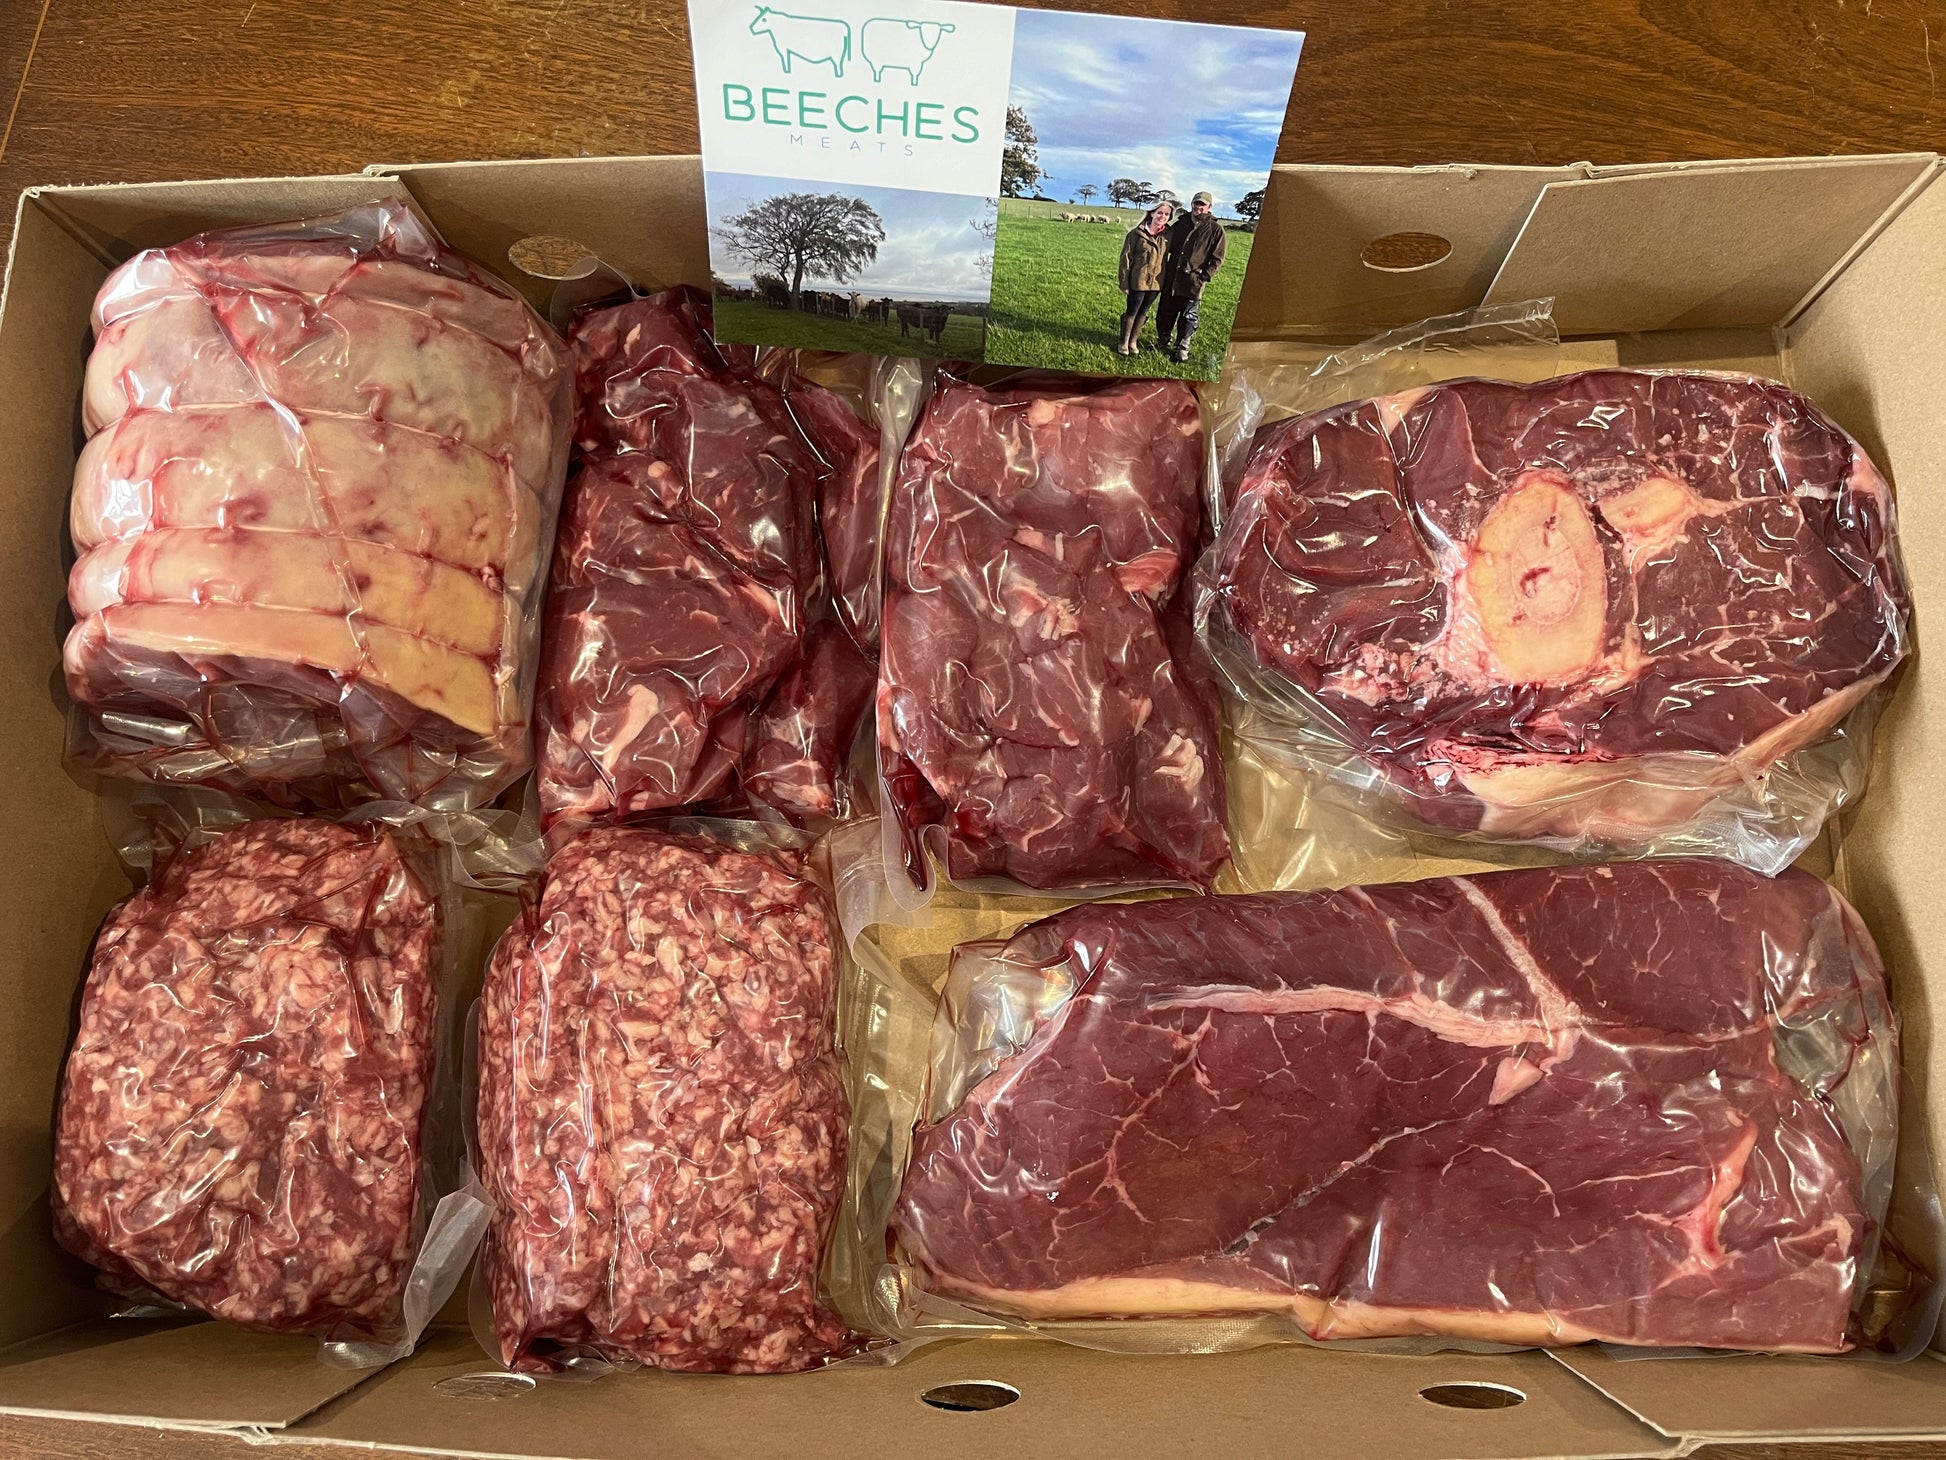 Low and slow beef box. Welsh, grass fed beef. Includes beef brisket, shin of beef, braising steak. For BBQ brisket or slow cooker meals. Tasty high quality beef.